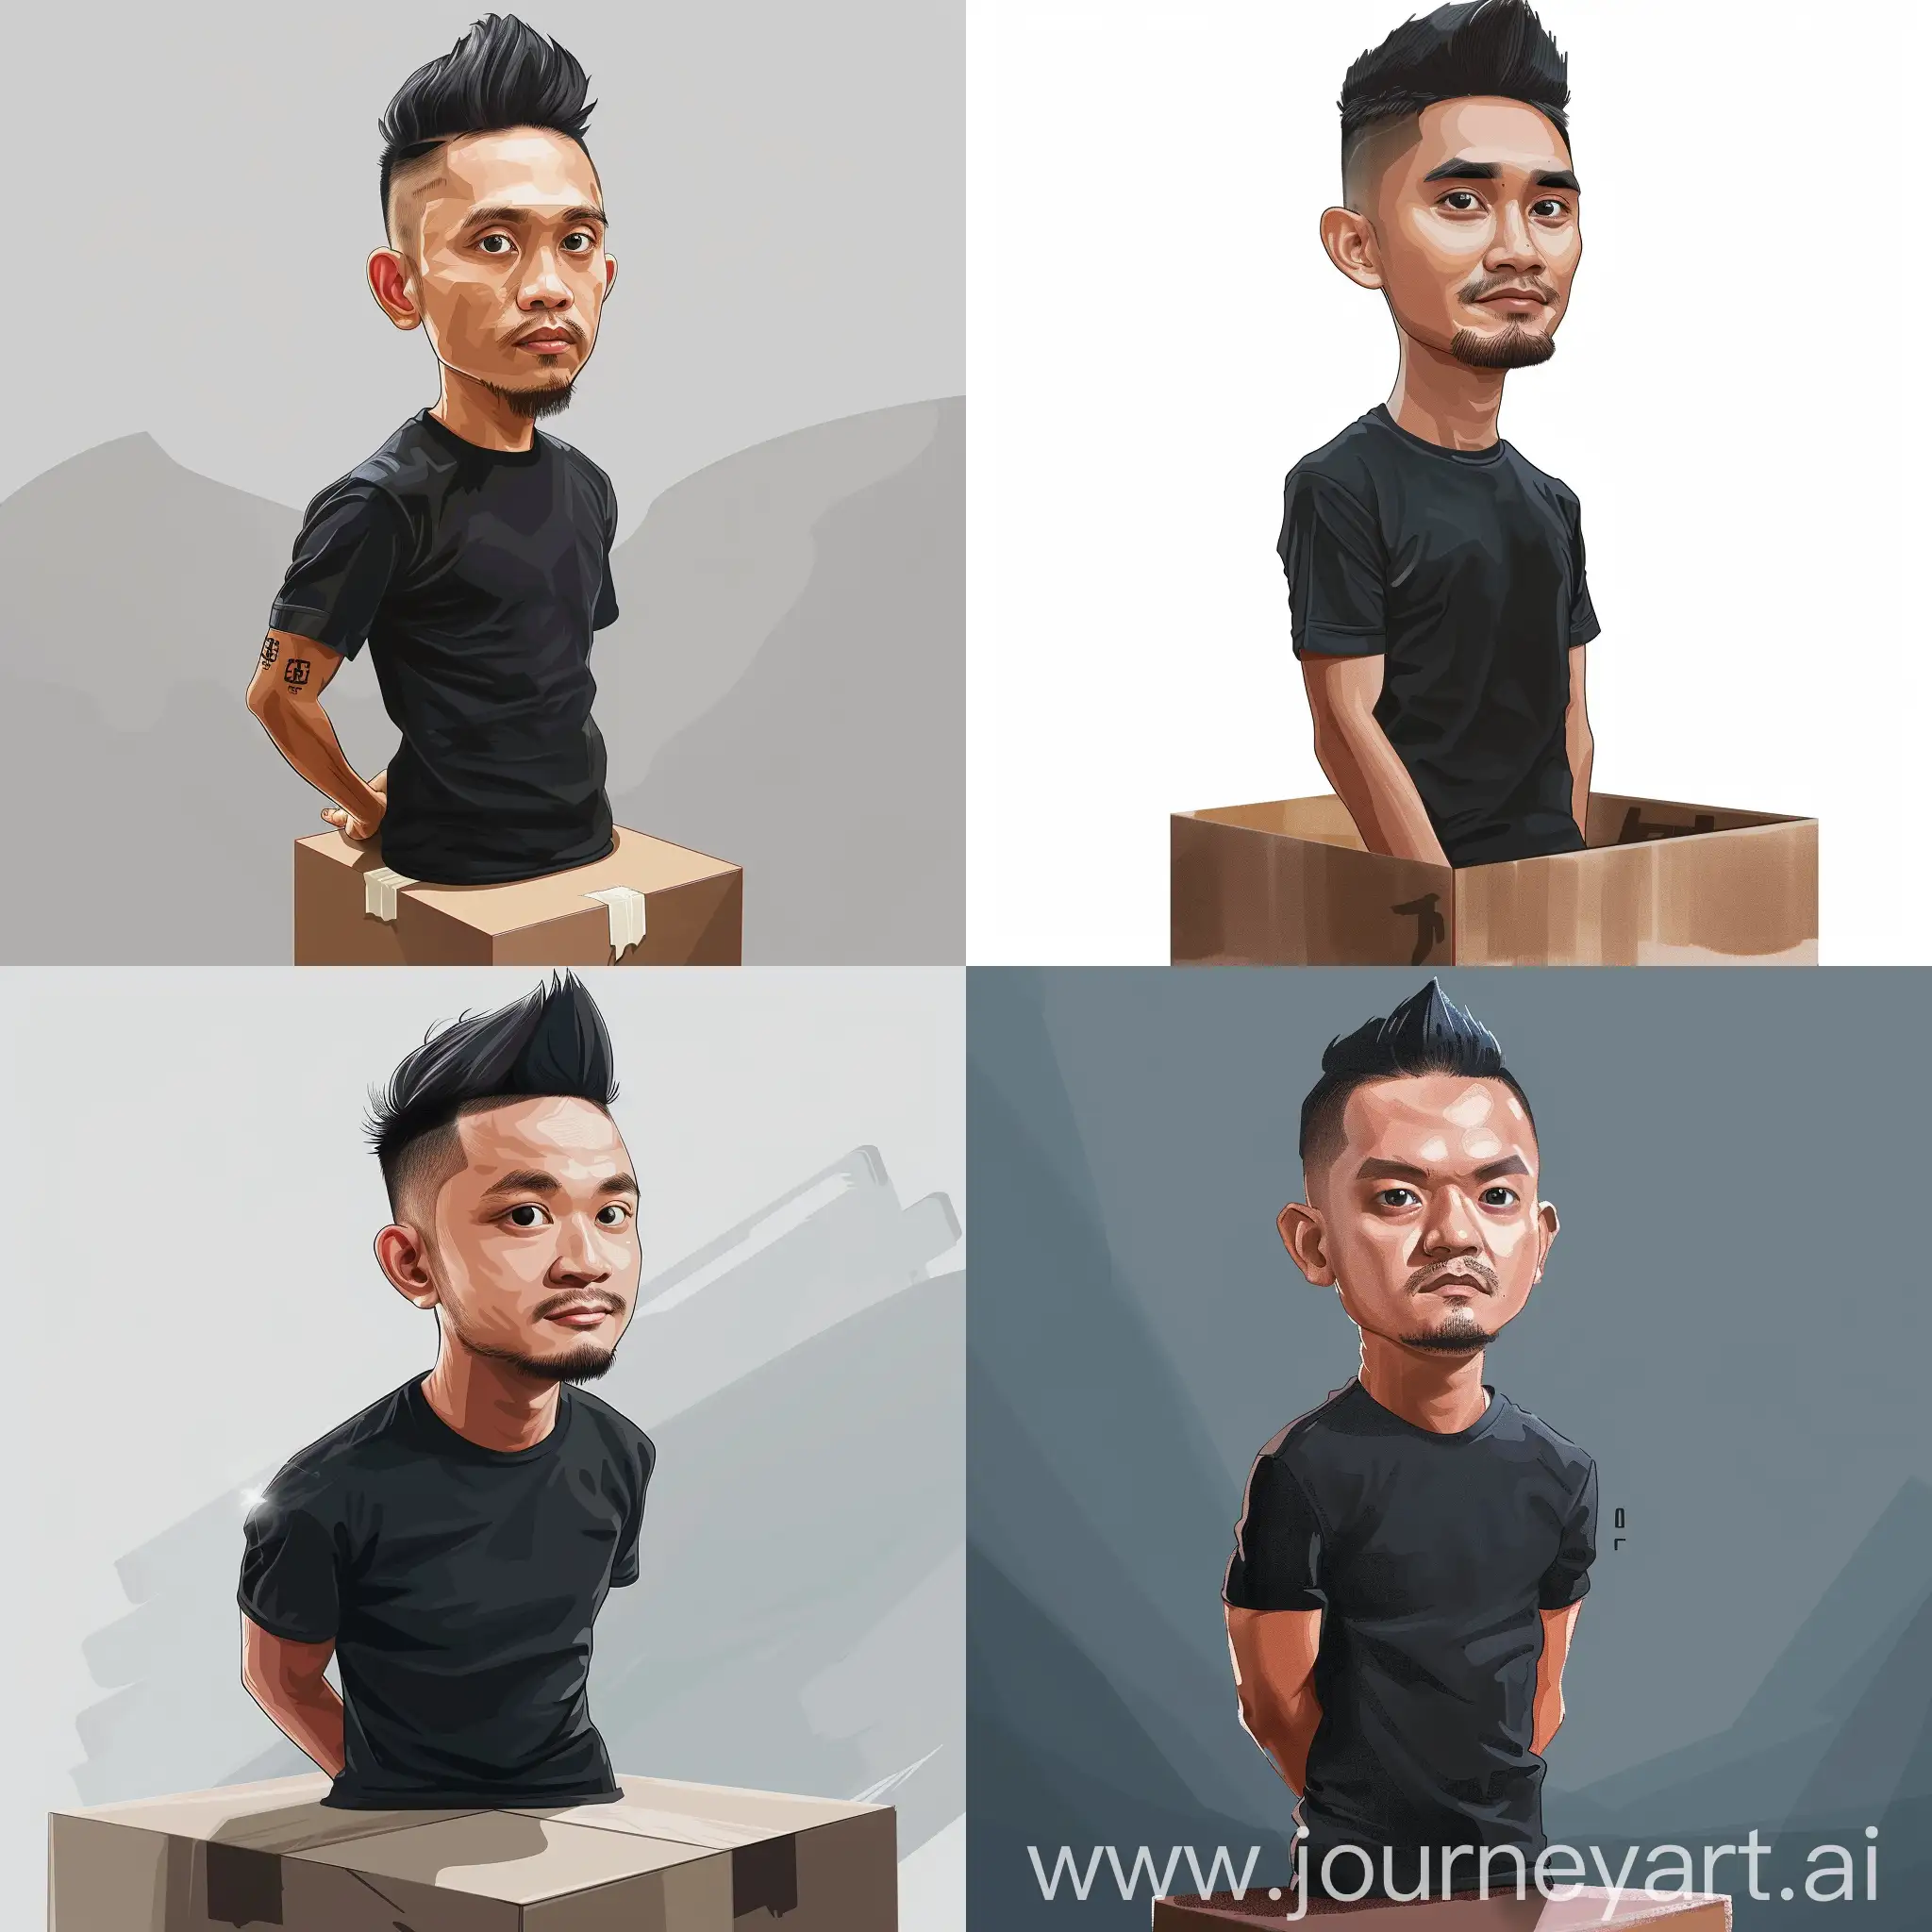 Semi caricature of an indonesian guy wearing black t-shirt buzz cut hair standing up on the box